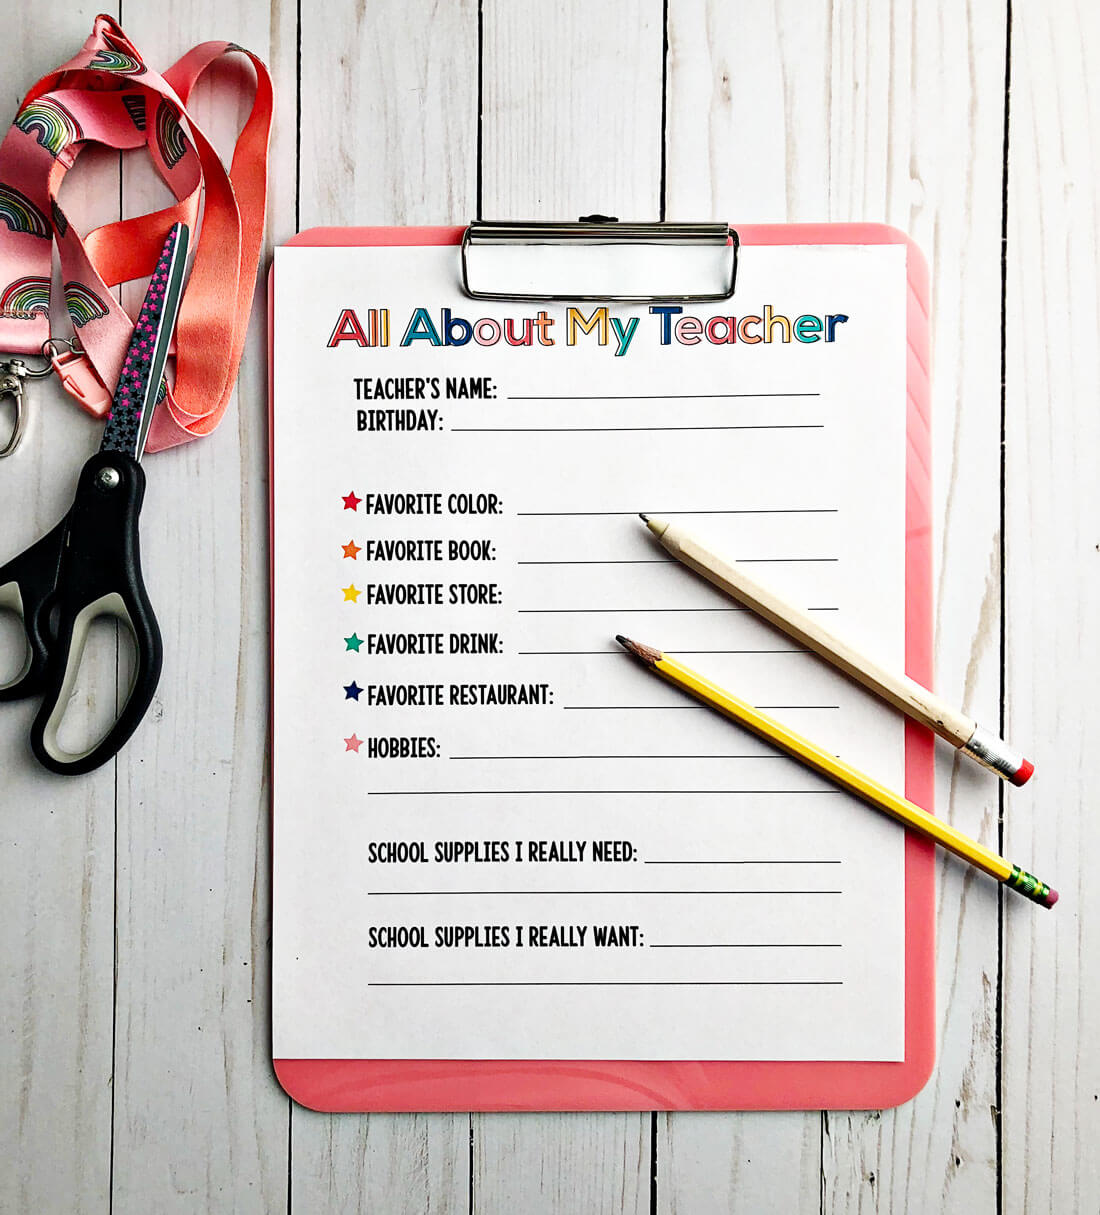 All About My Teacher Printable for Gifts - use this printable to get the perfect gift! 